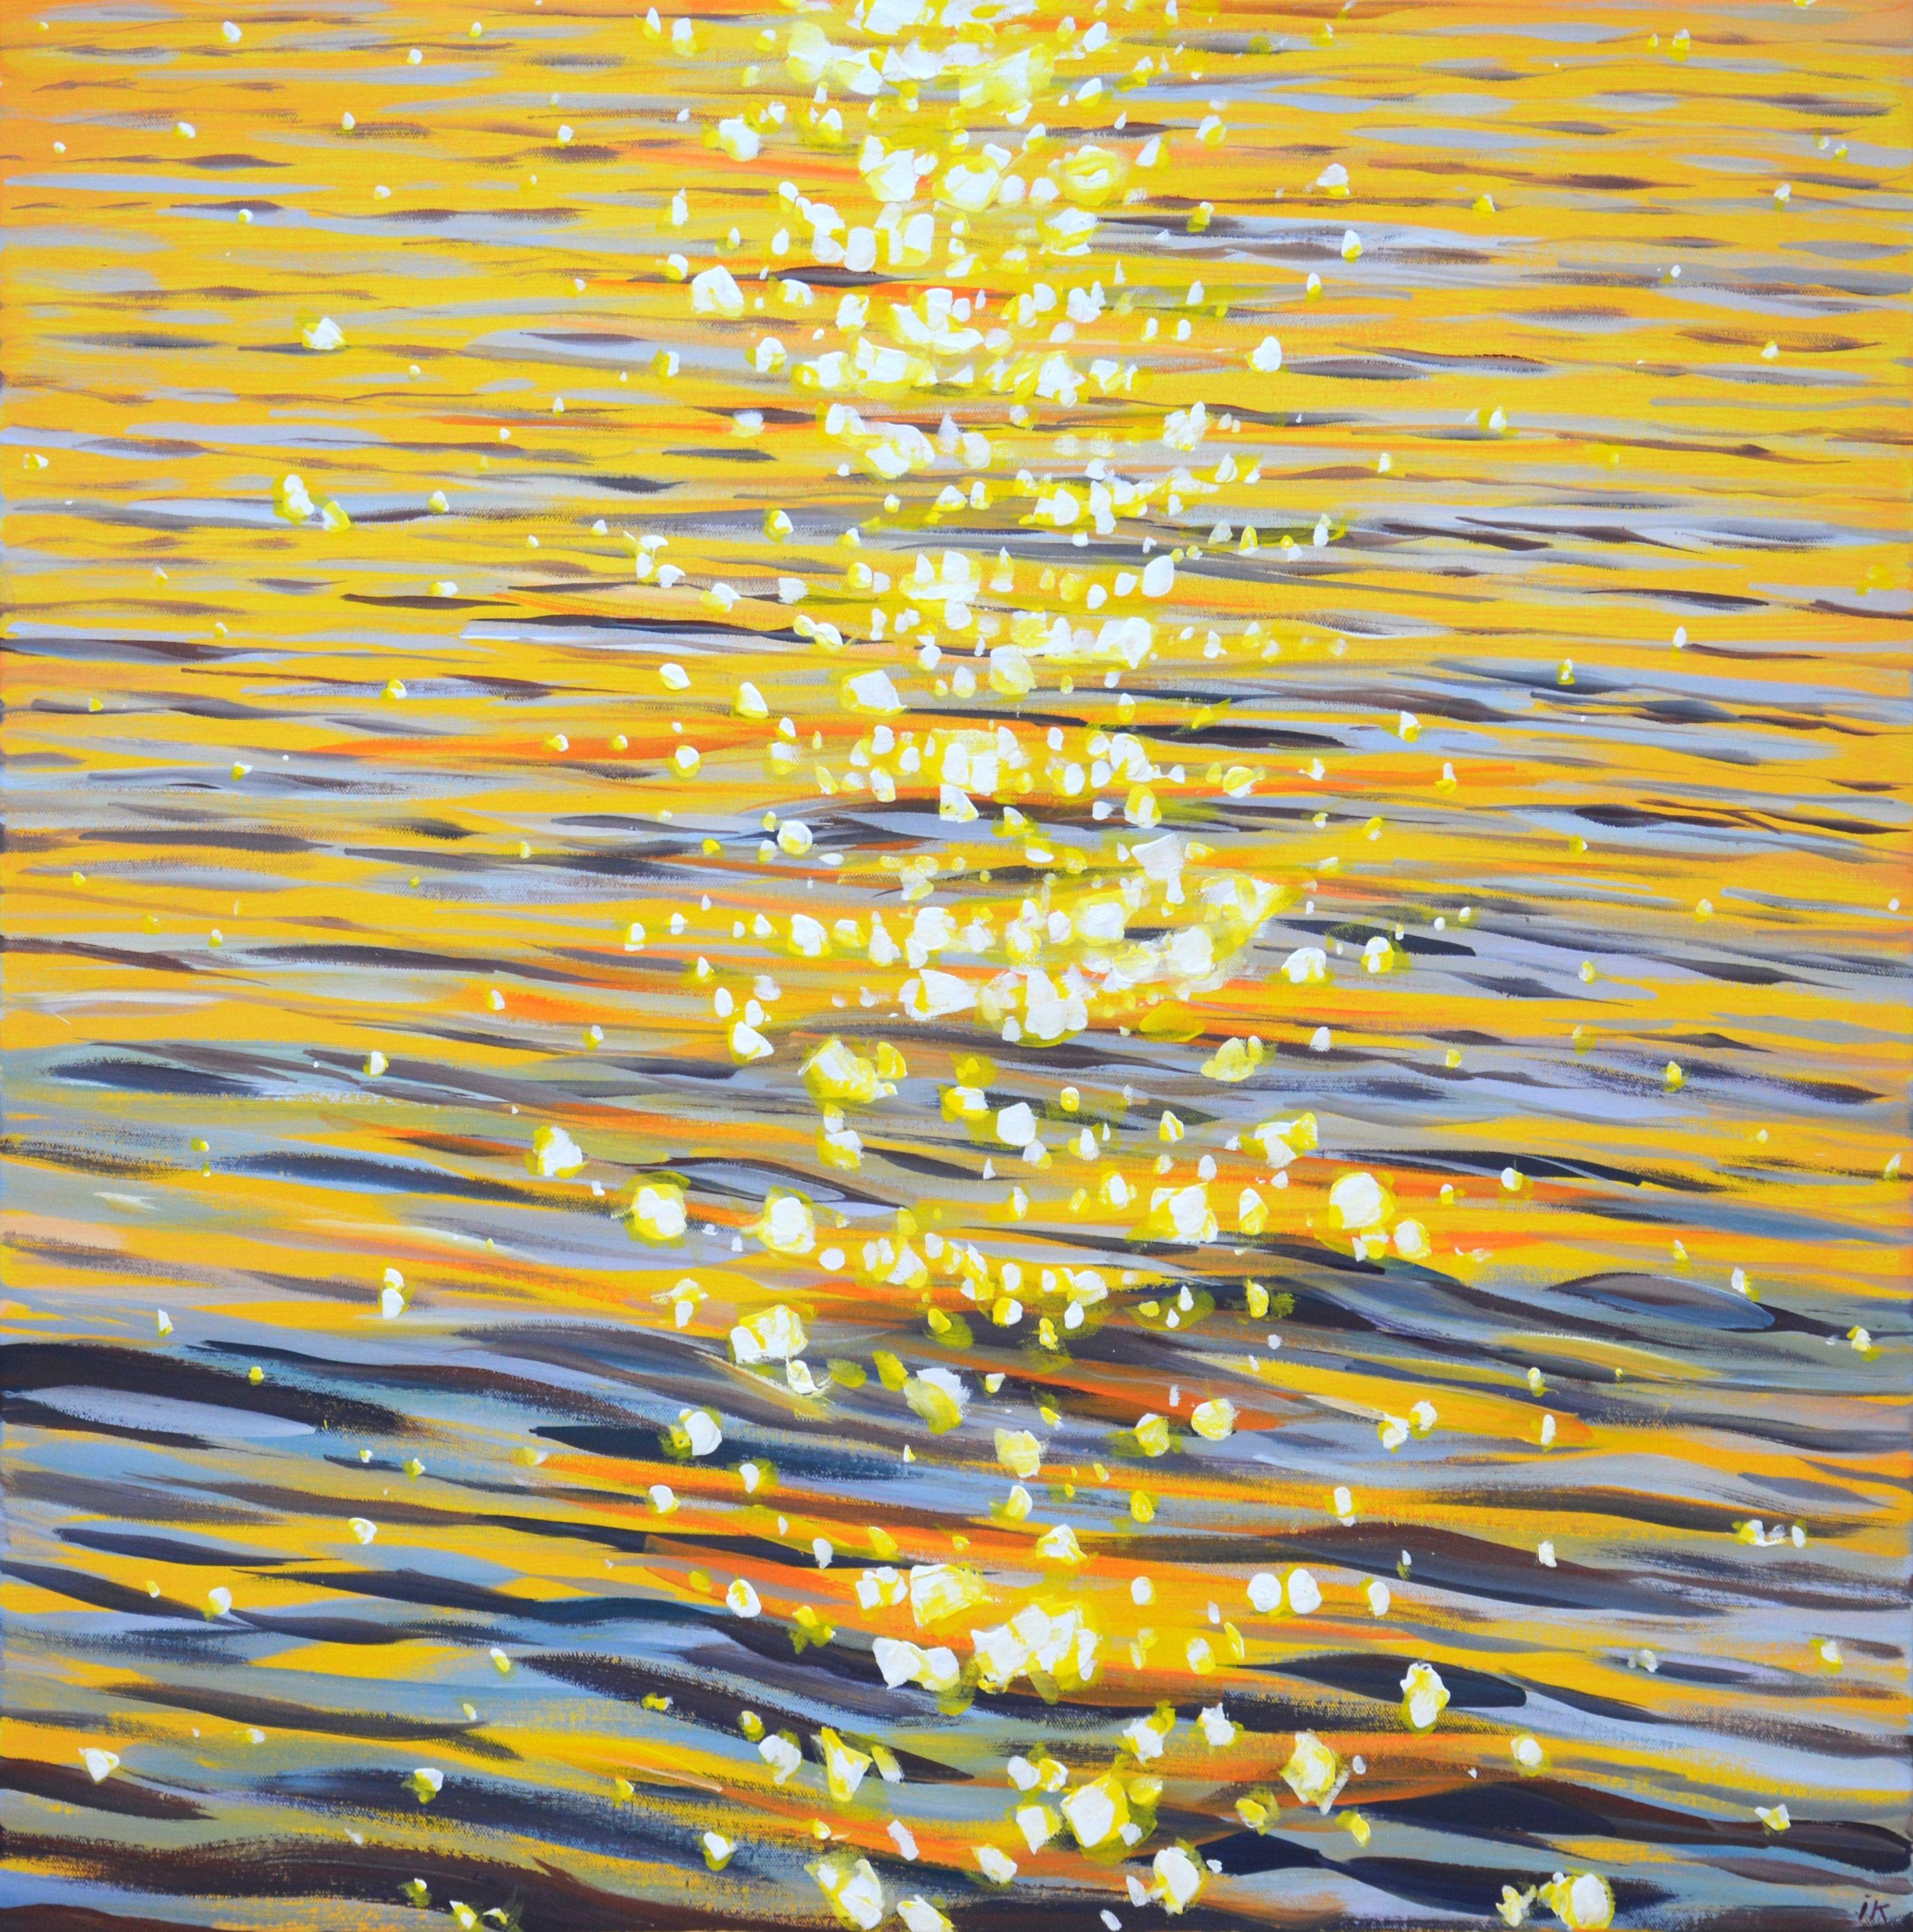 Gold sparks on the water. Warm water, waves, serene views, ocean shine, evening sun glare on the water create an atmosphere of relaxation and romance. Made in the style of realism, a calm yellow palette with warm water and golden highlights. Part of